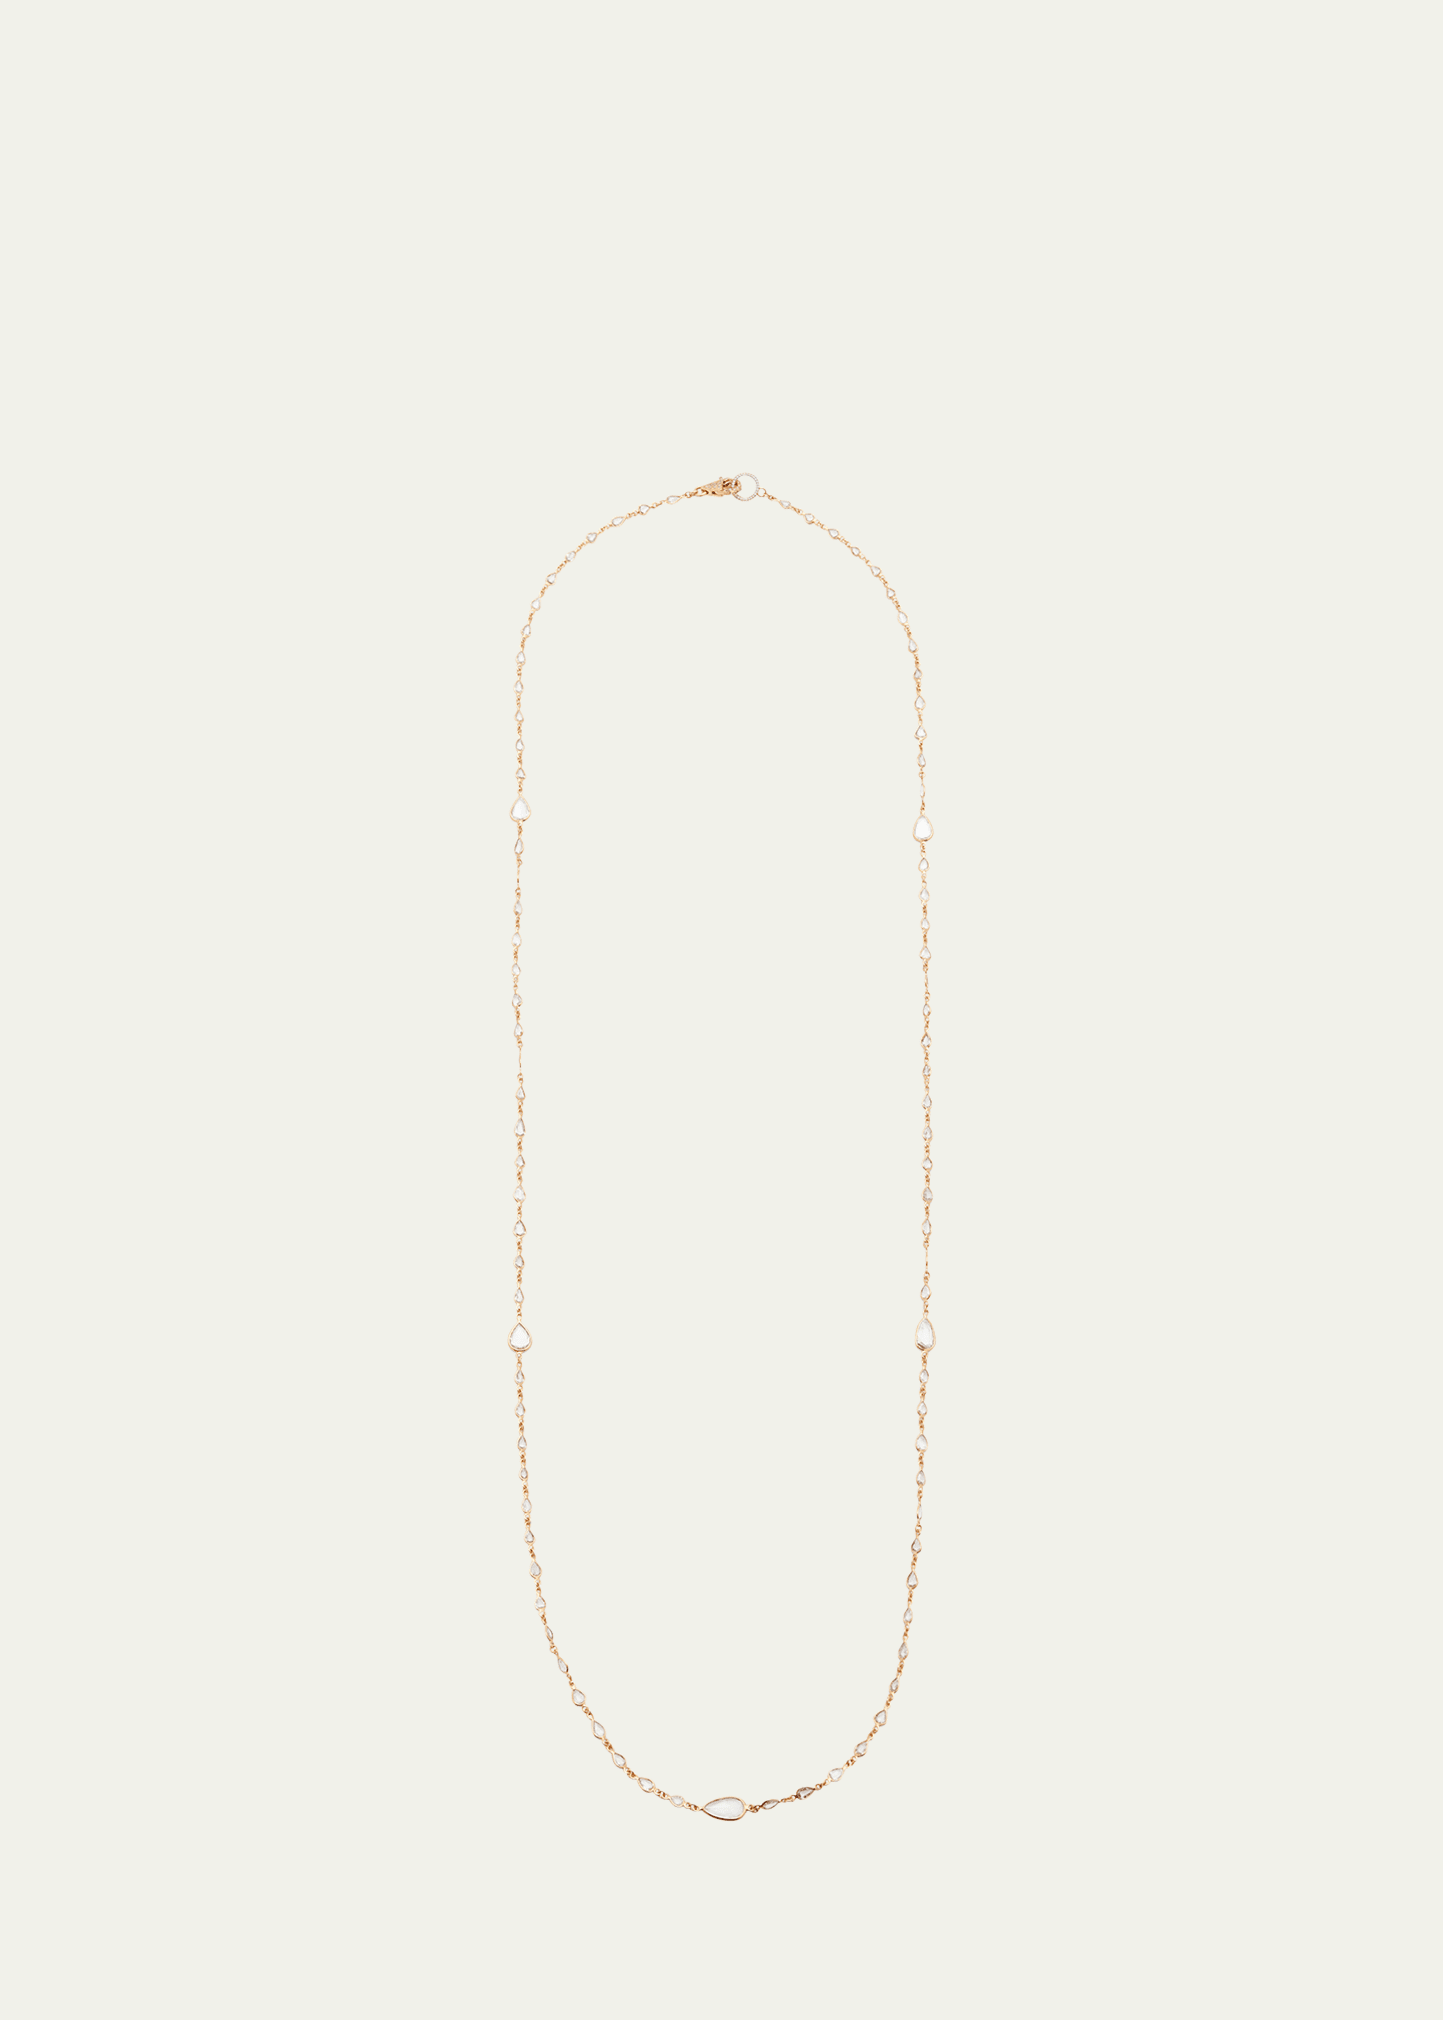 18K Pink Gold and Black Rhodium Graduated Riviera Necklace with Diamonds